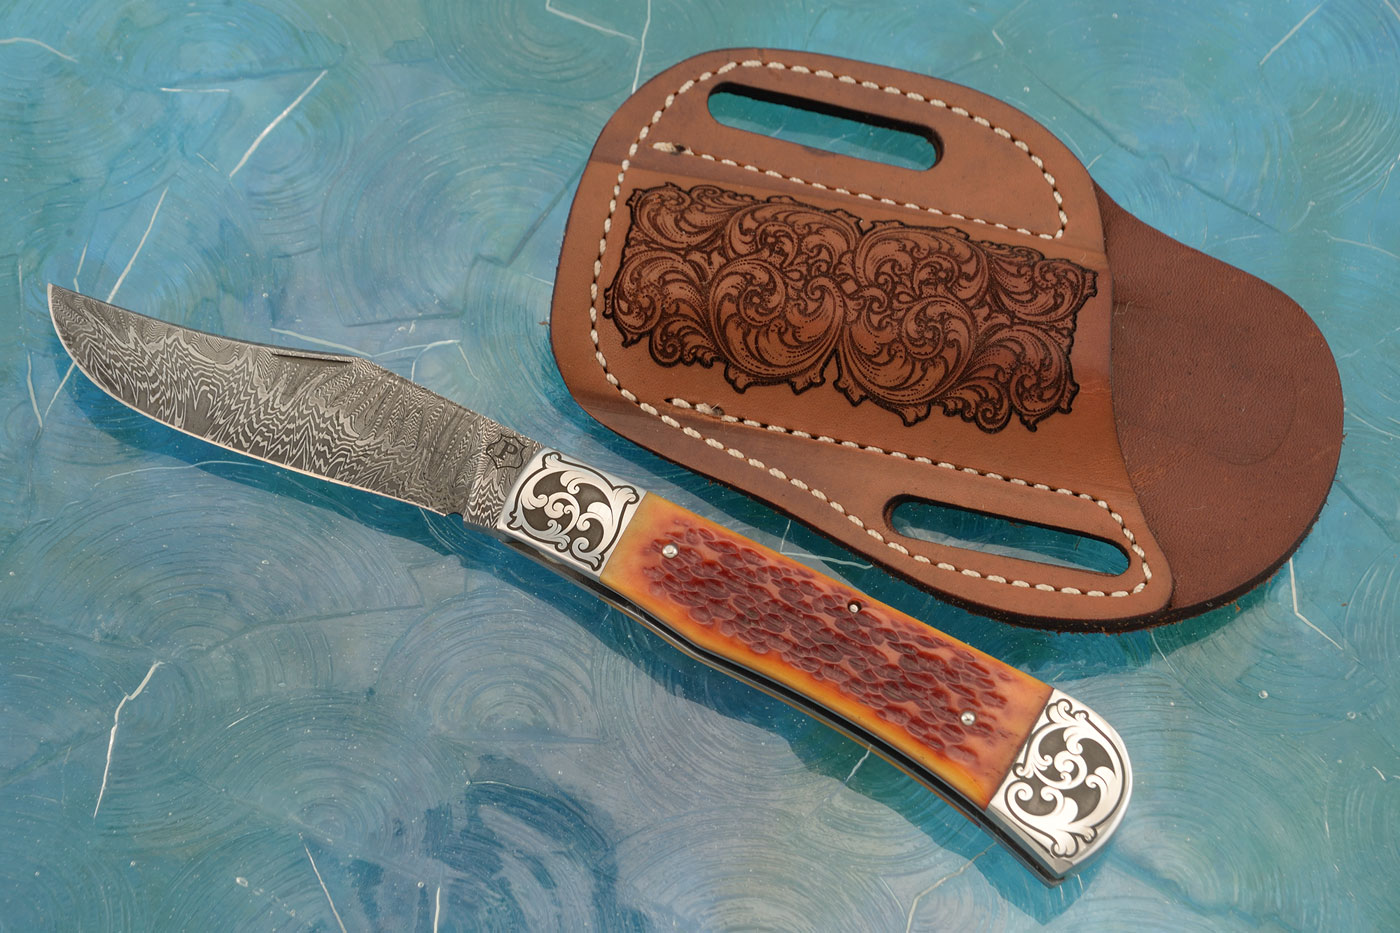 Damascus Slipjoint Trapper with Amber Jigged Bone